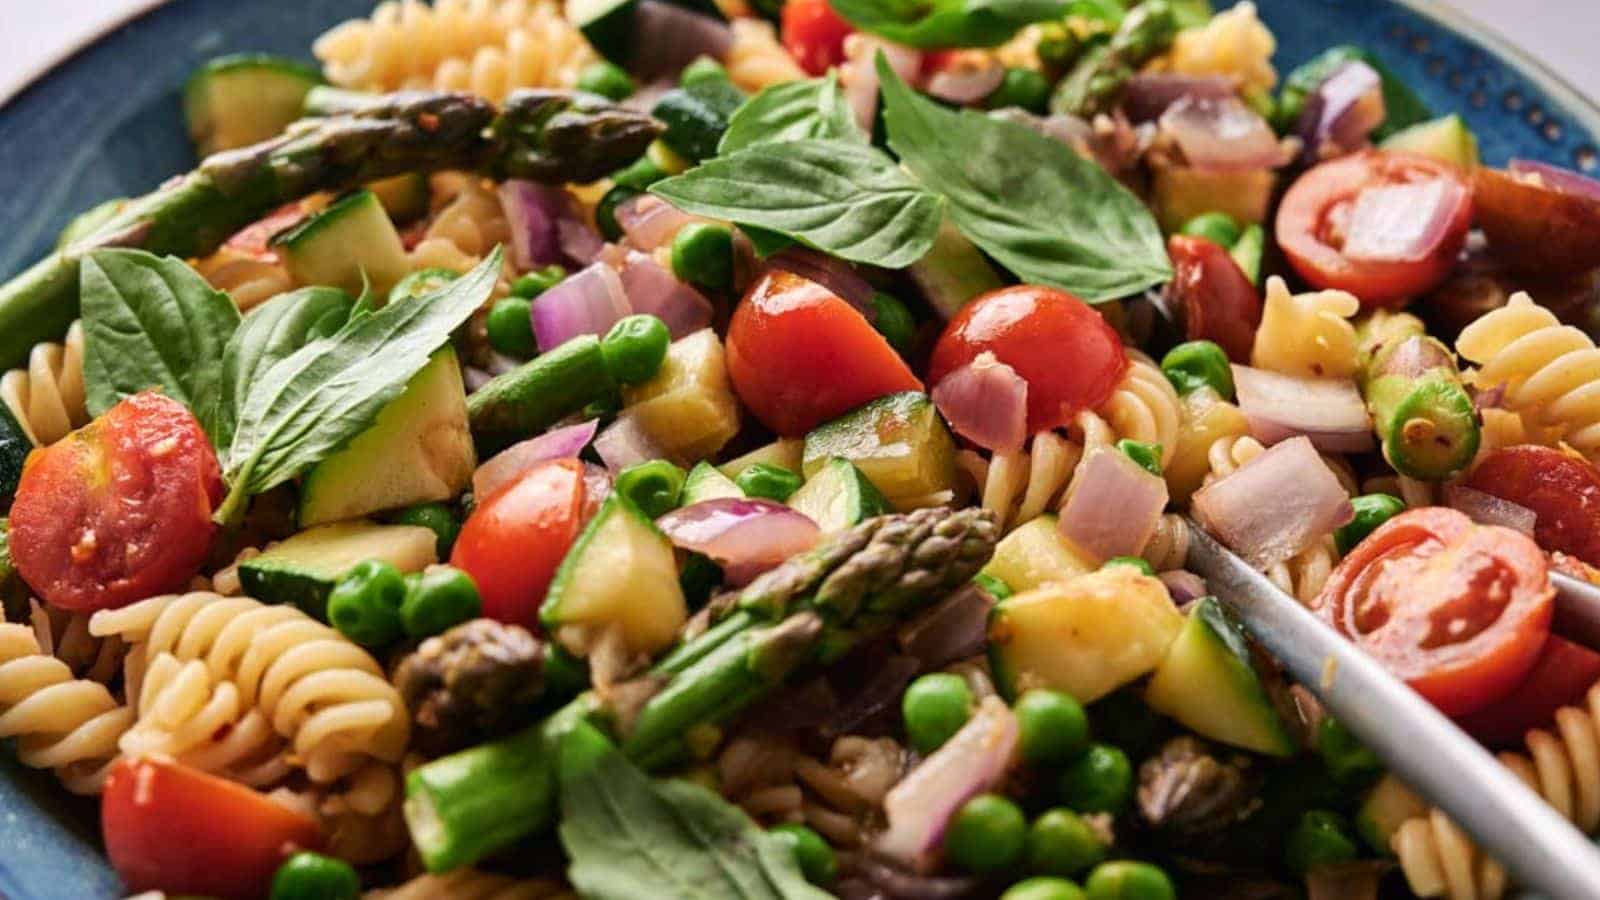 <p>Spring comes alive with our Pasta Primavera, featuring a mix of vibrant veggies and pasta. It's light, fresh, and perfect for those who enjoy a bit of crunch with their pasta. This dish makes for a colorful dinner that's both pleasing to the eye and the palate. Serve it when you want something a bit lighter but still filling.<br><strong>Get the Recipe: </strong><a href="https://www.splashoftaste.com/pasta-primavera/?utm_source=msn&utm_medium=page&utm_campaign=">Pasta Primavera</a></p>